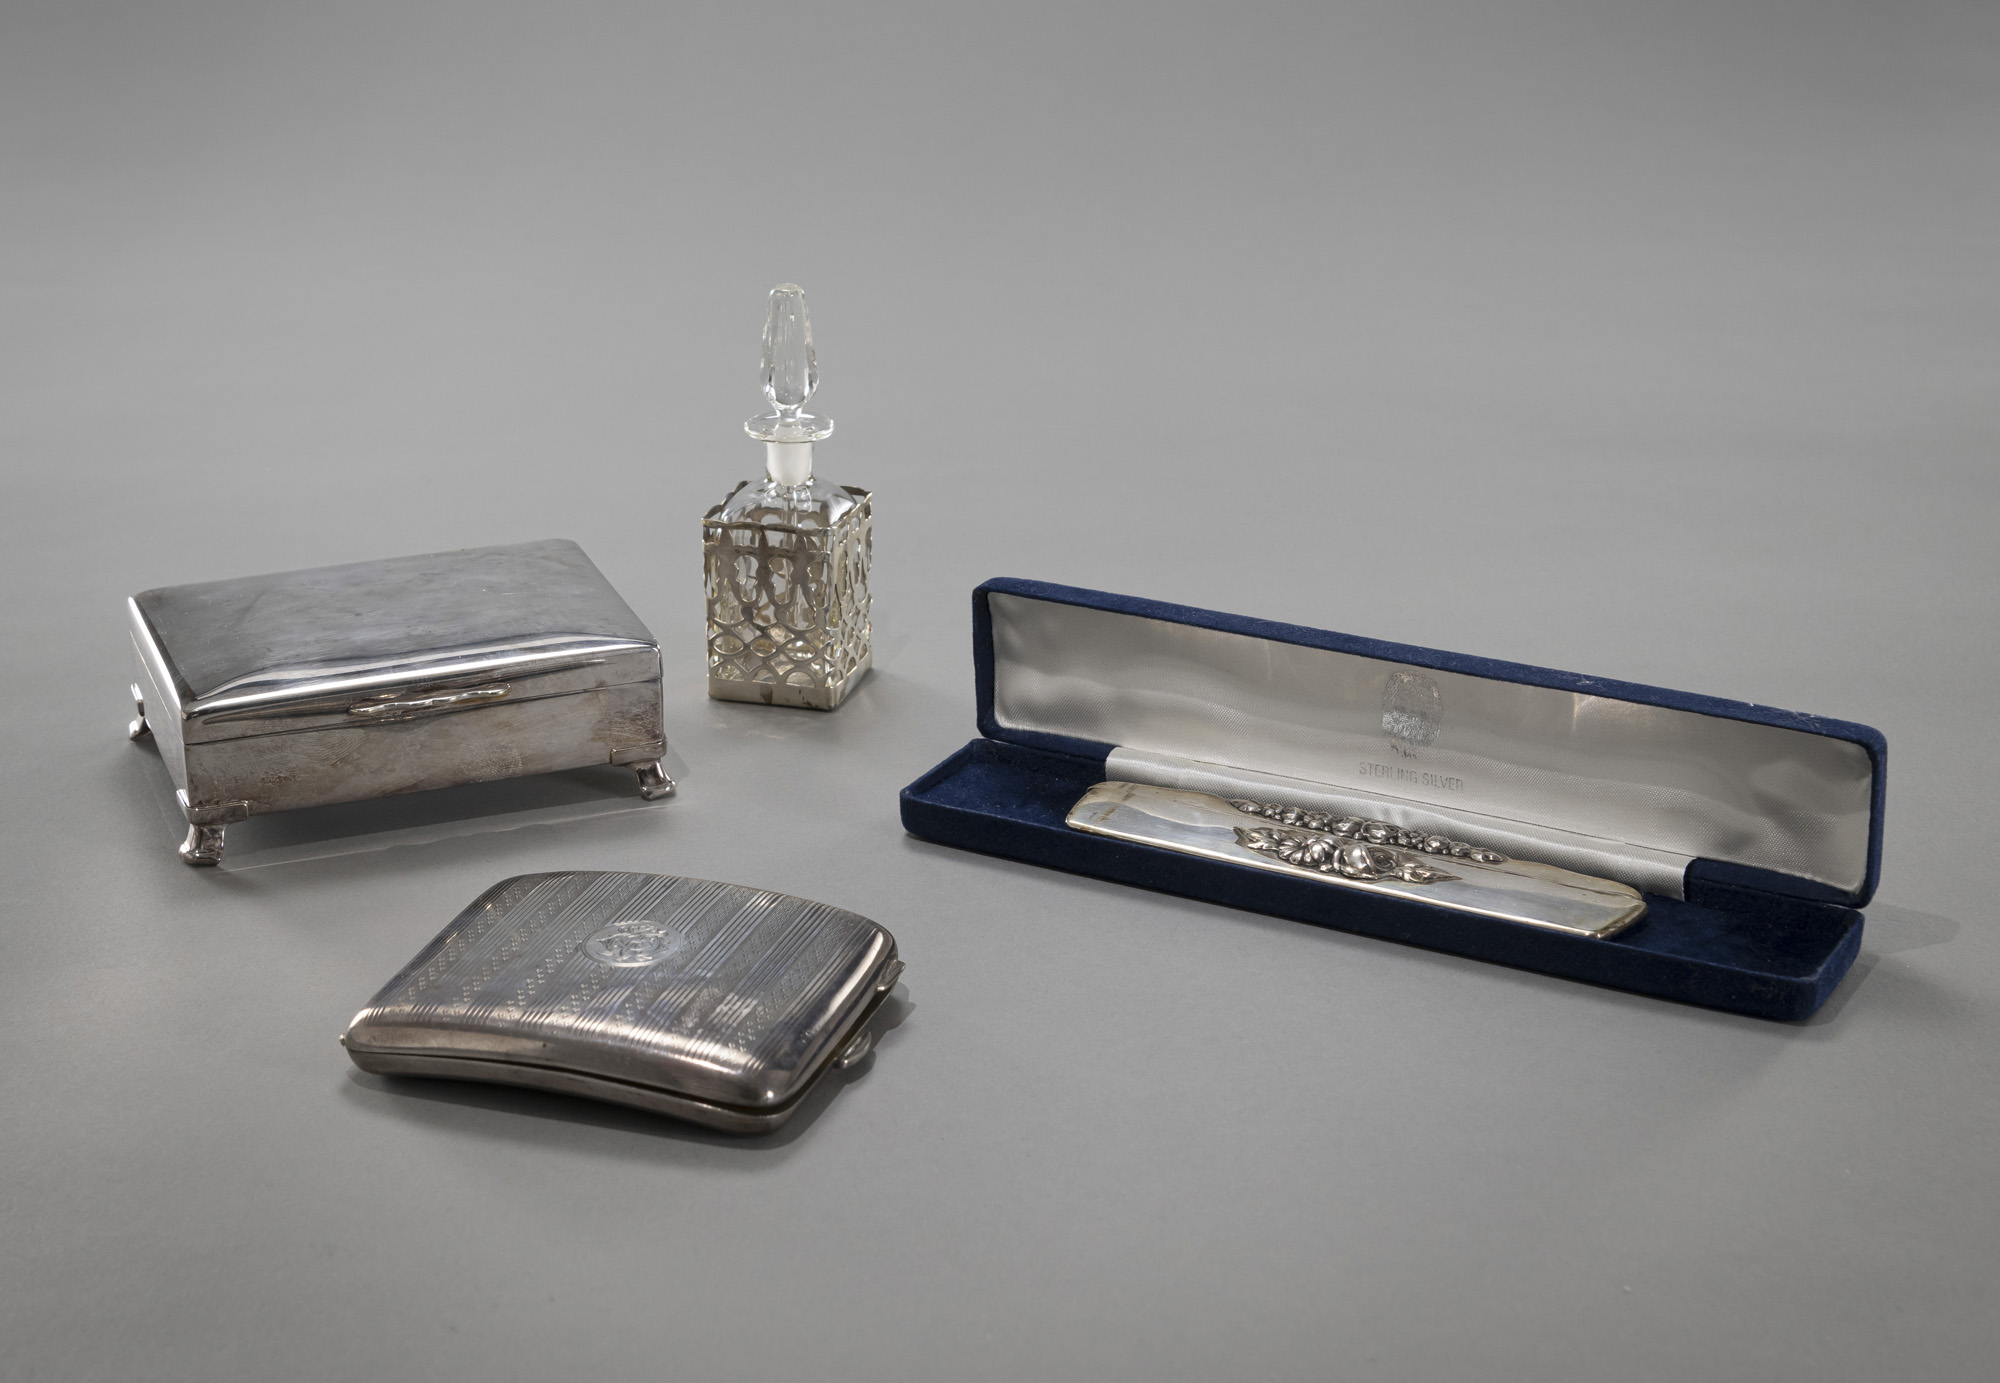 TWO CIGARETTE CASES; A PERFUME FLACON AND A COMB - Image 2 of 4